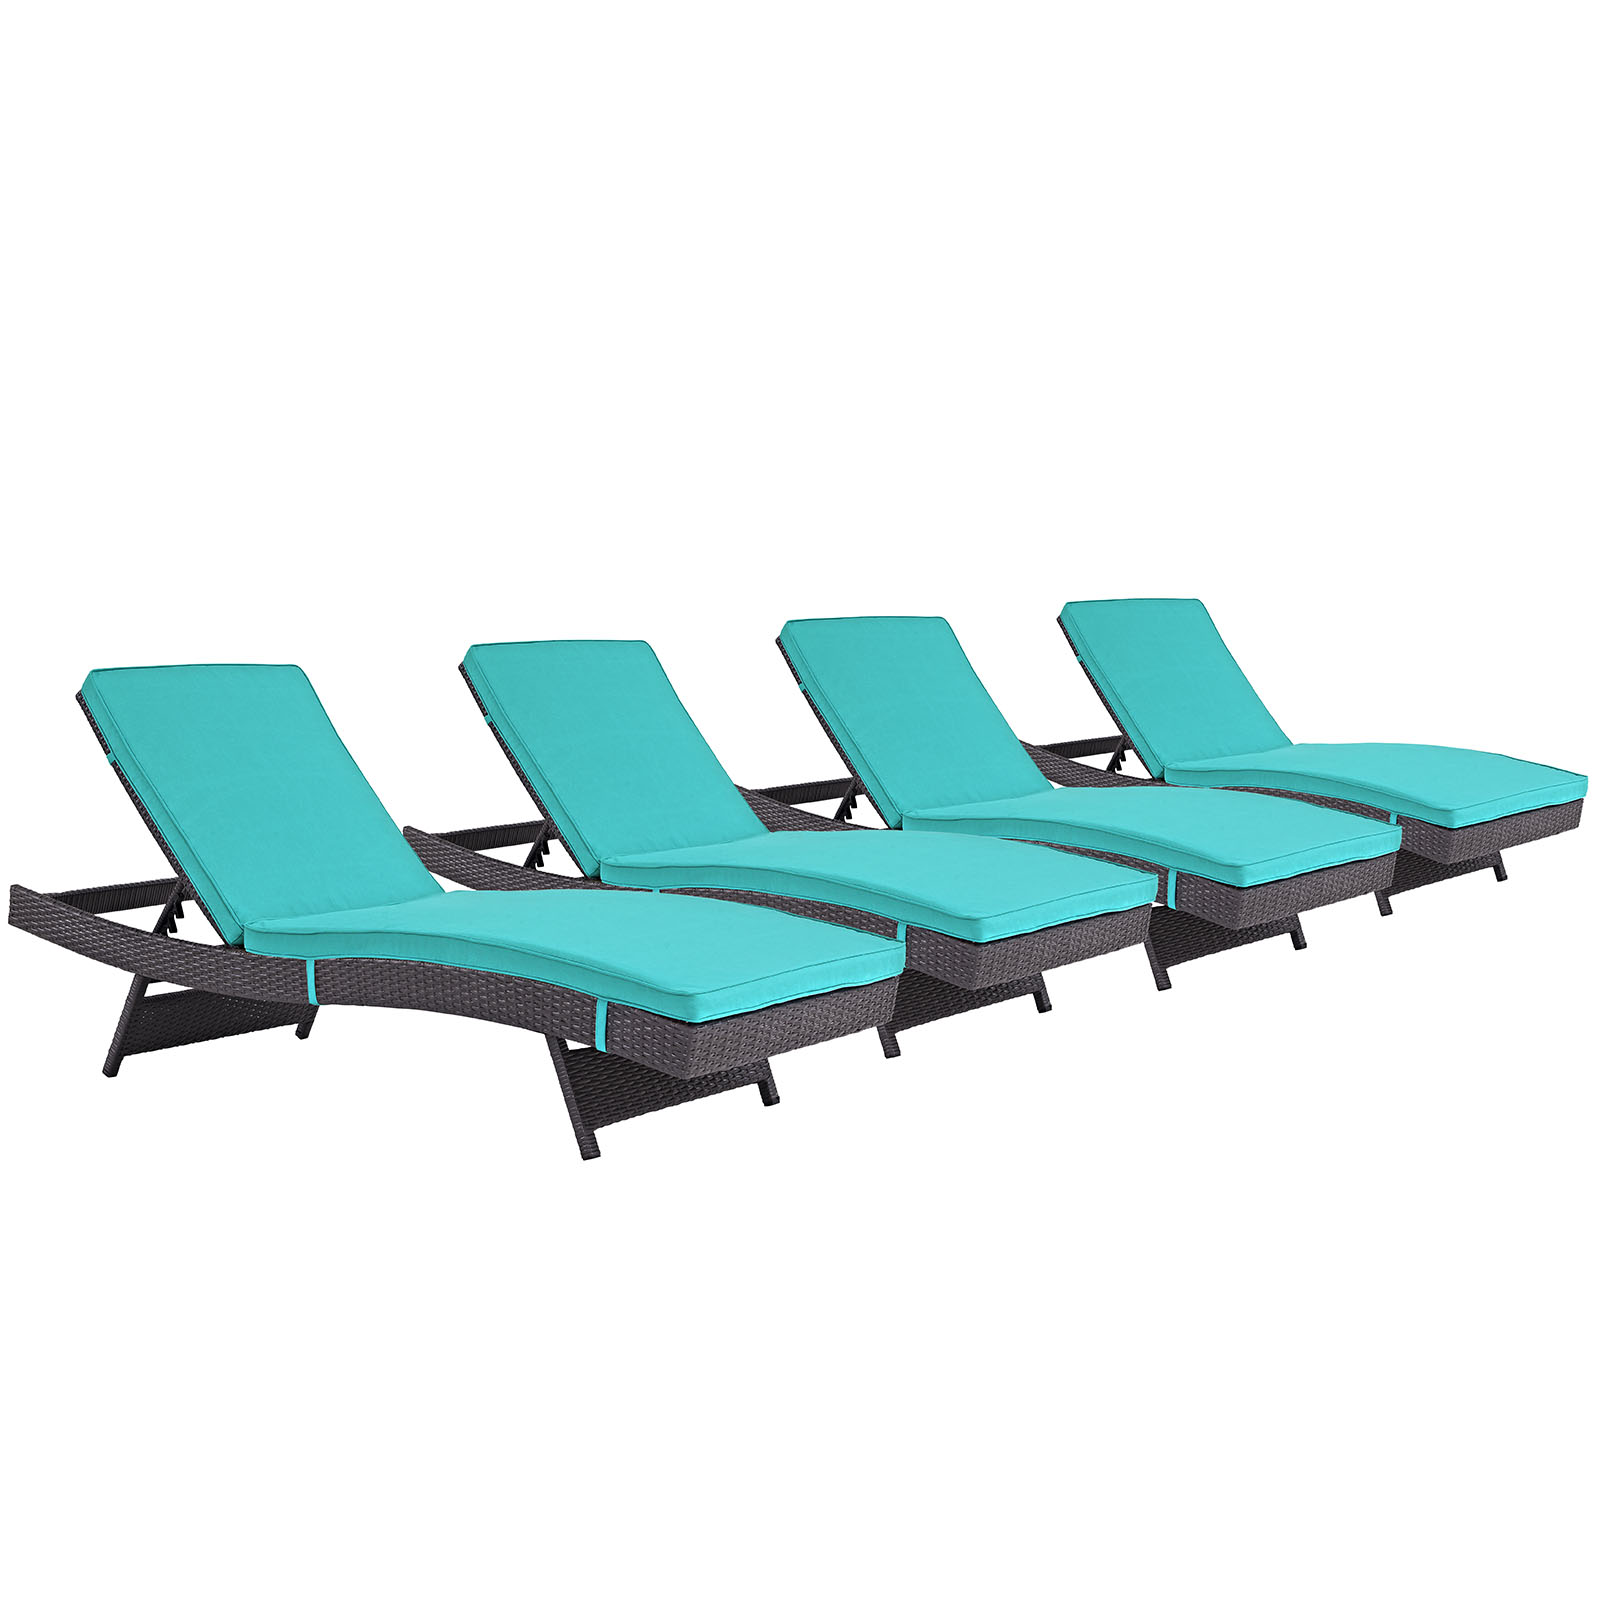 Modway Convene Chaise Outdoor Patio Set of 4 in Espresso Turquoise - image 2 of 5